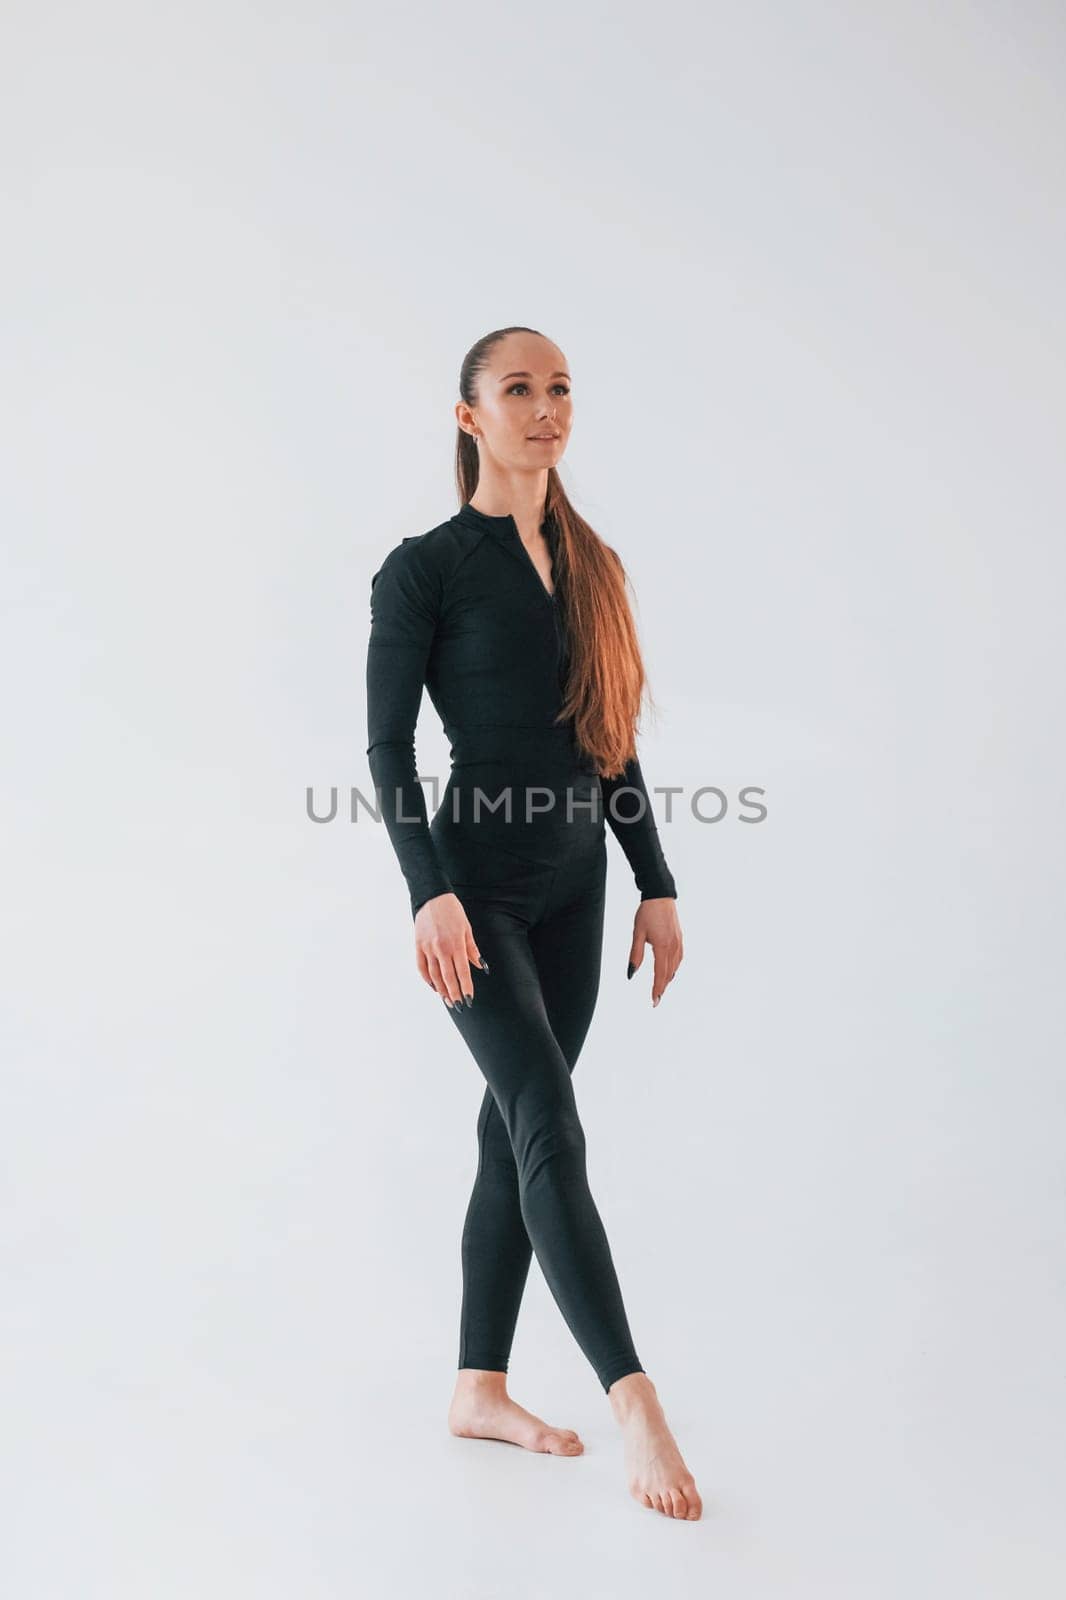 White background. Young woman in sportive clothes doing gymnastics indoors.